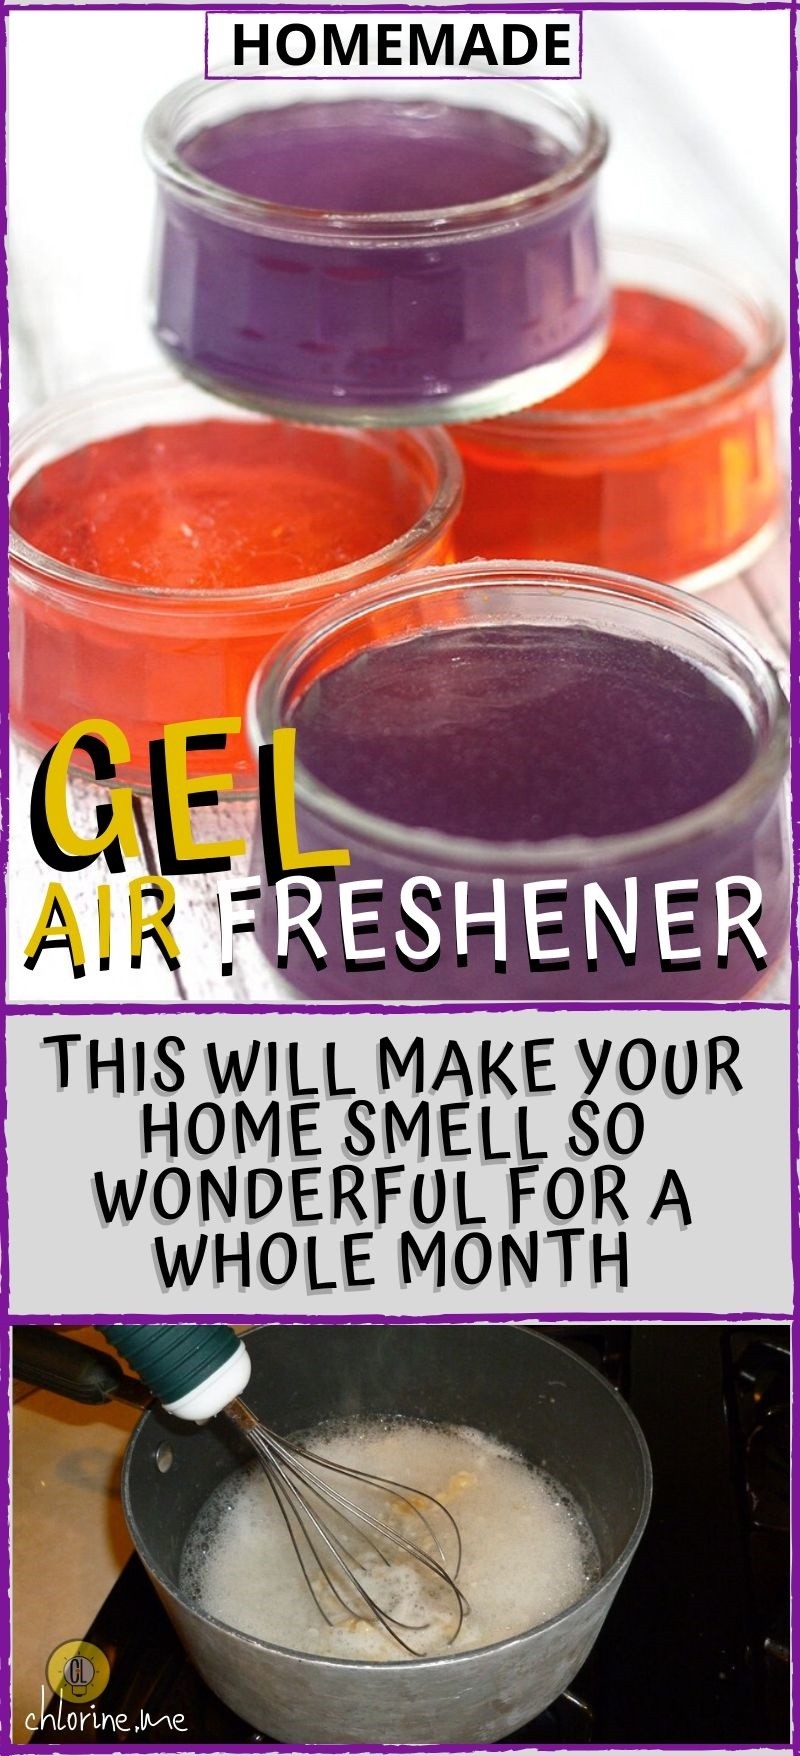 gel air freshener for your home (1)